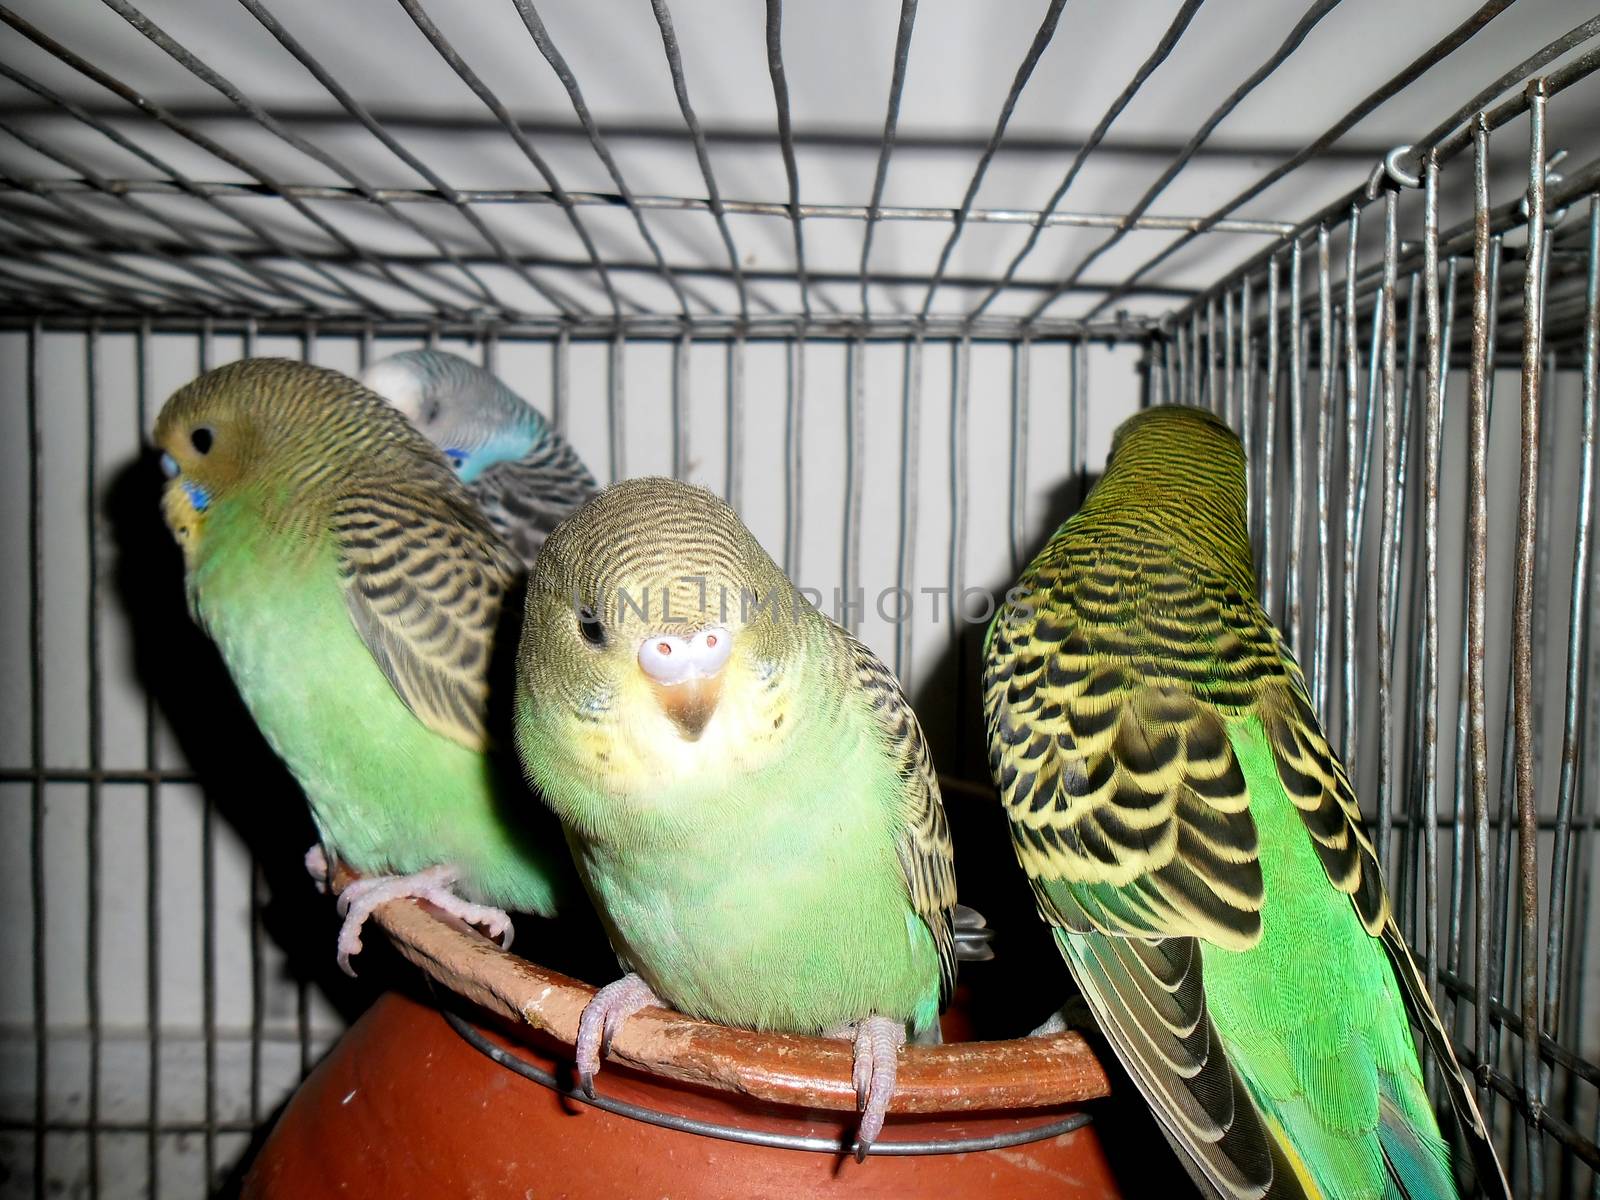 A group of lovely budgerigars